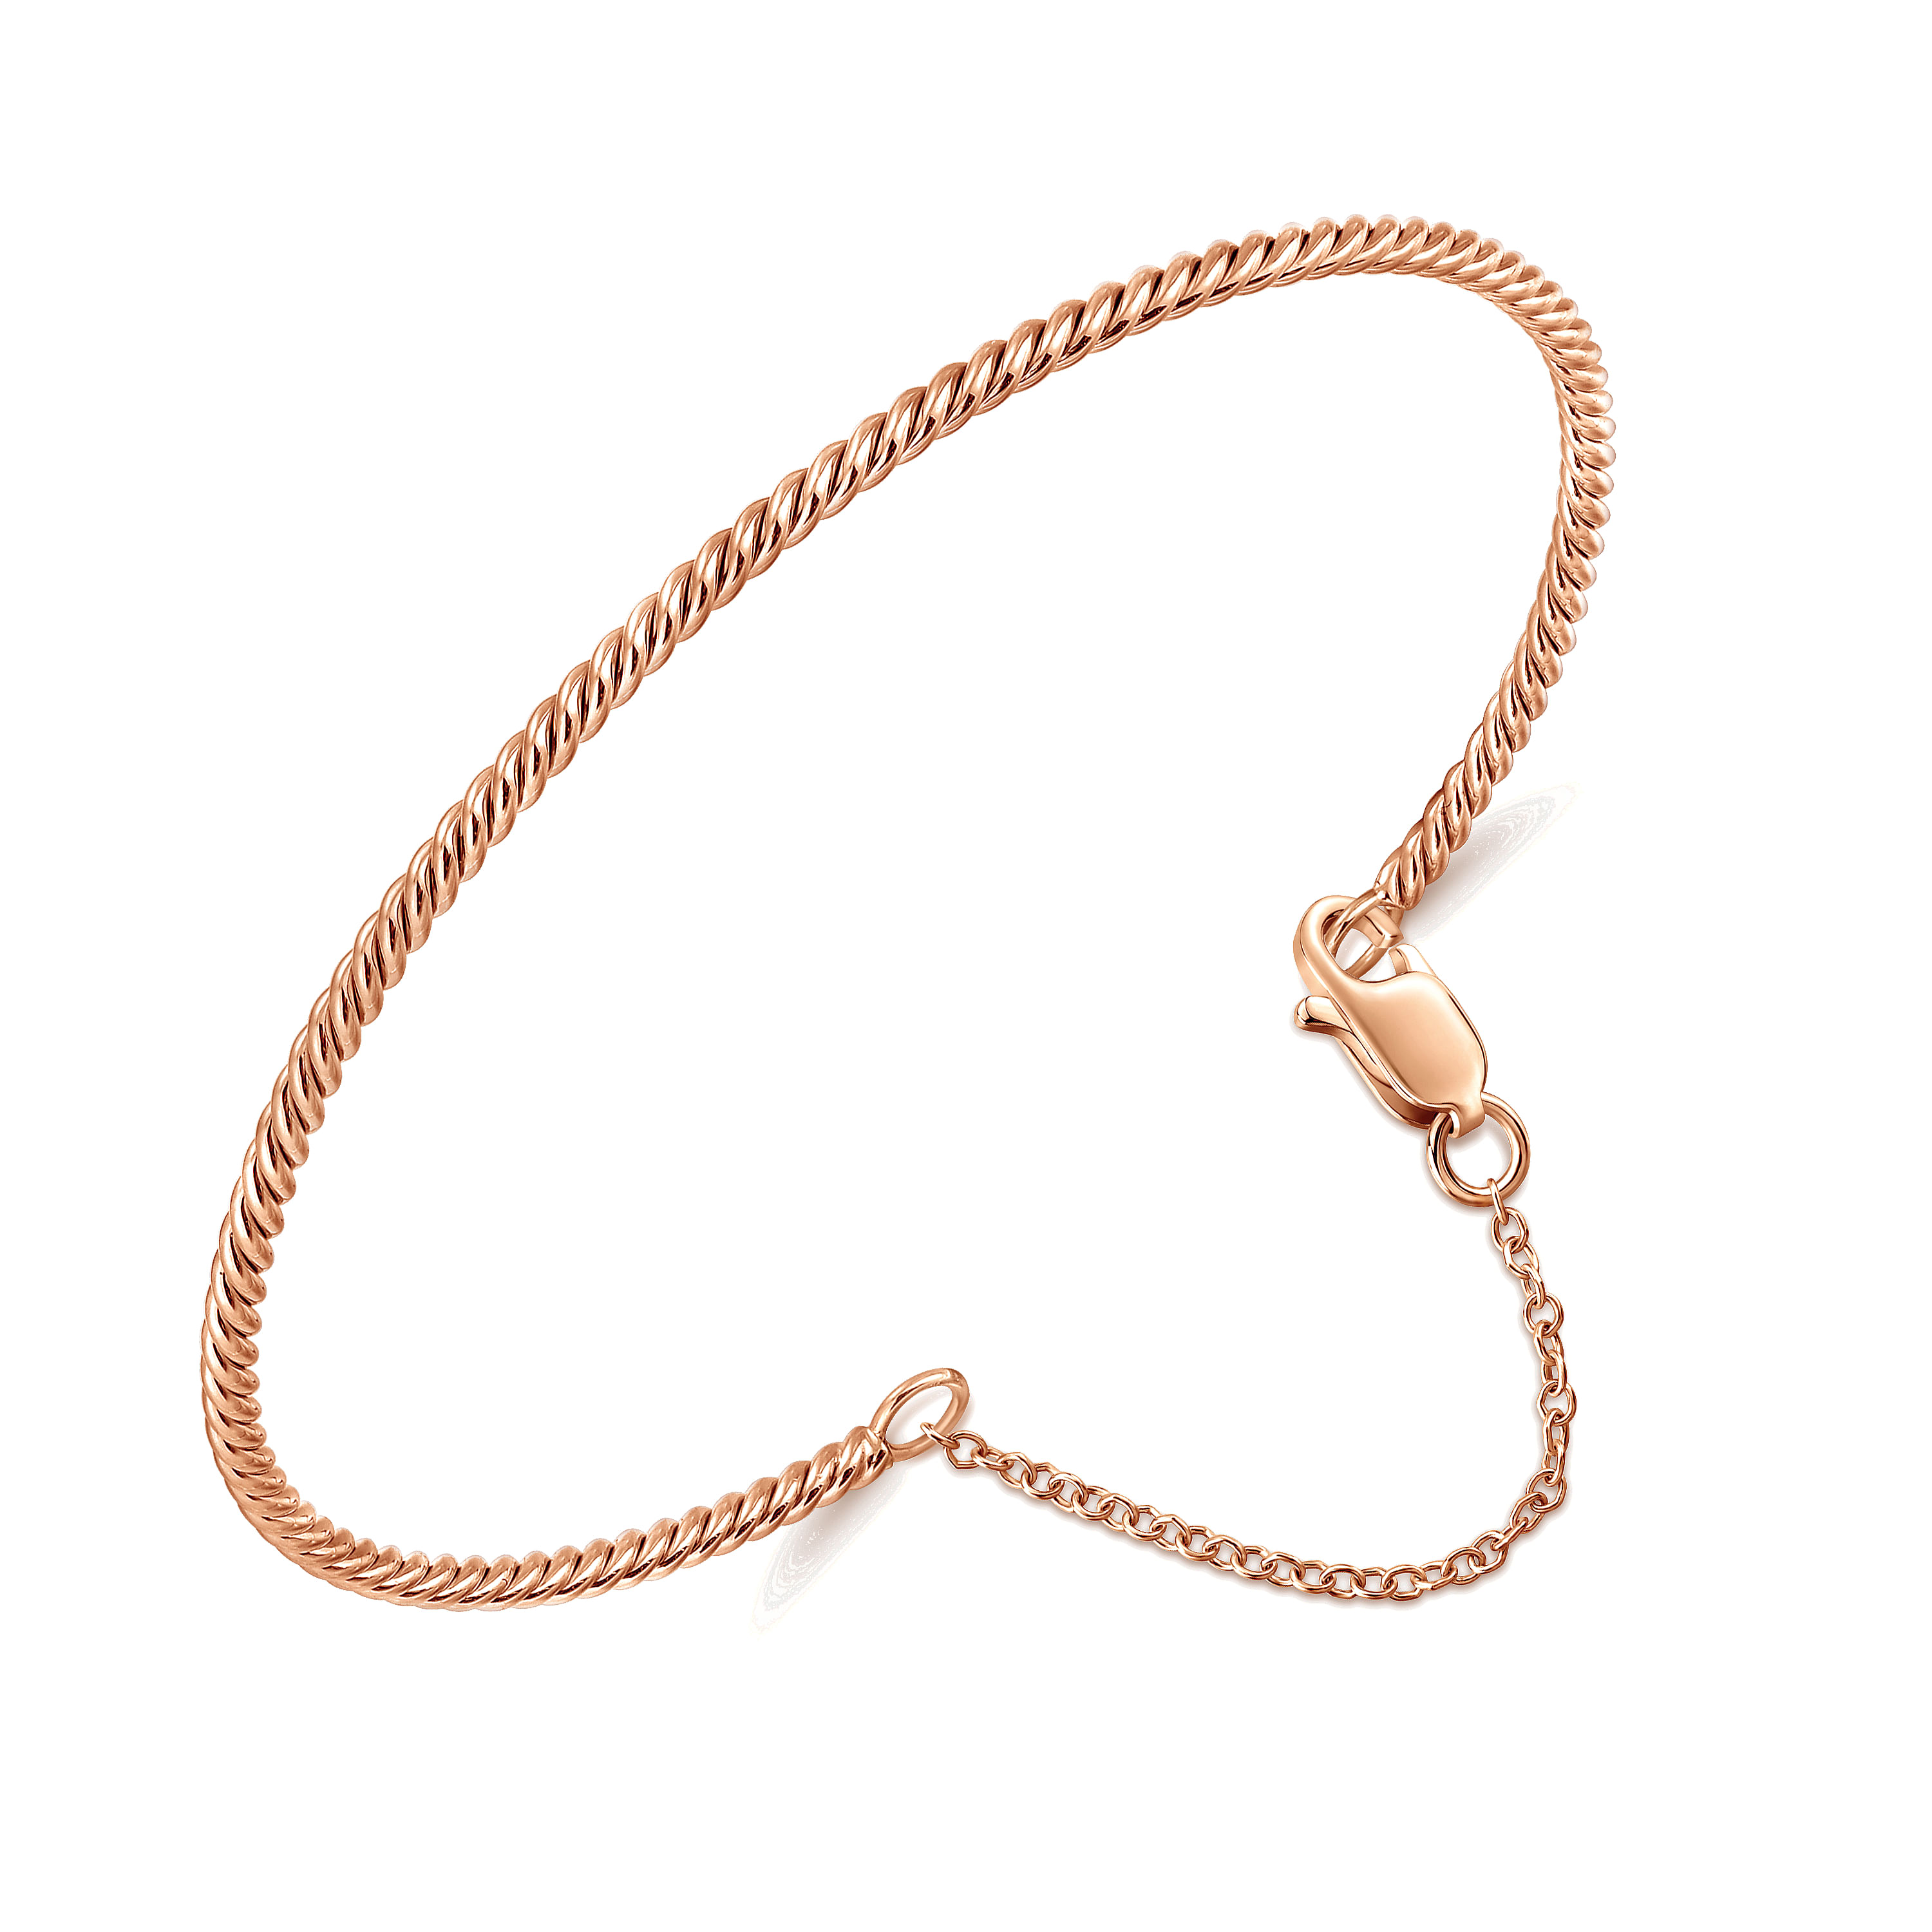 14K Rose Gold Twisted Bangle with Chain Drop